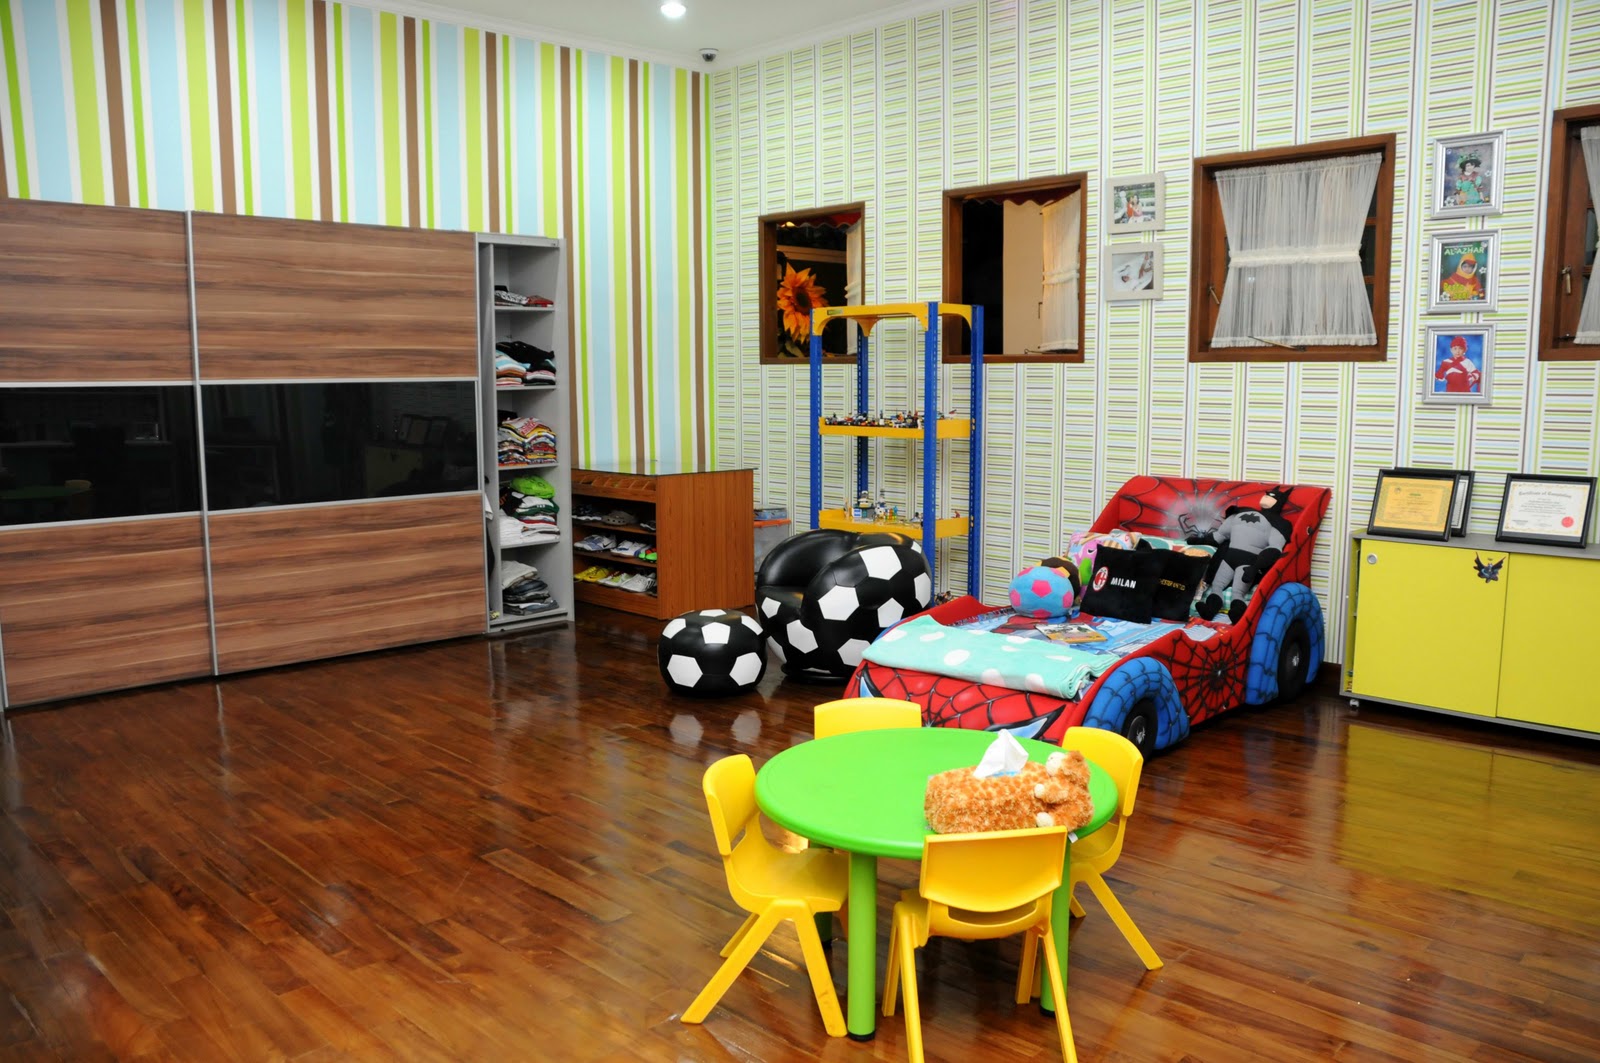 Home and Garden Review and Tips: Designing Child Play Room